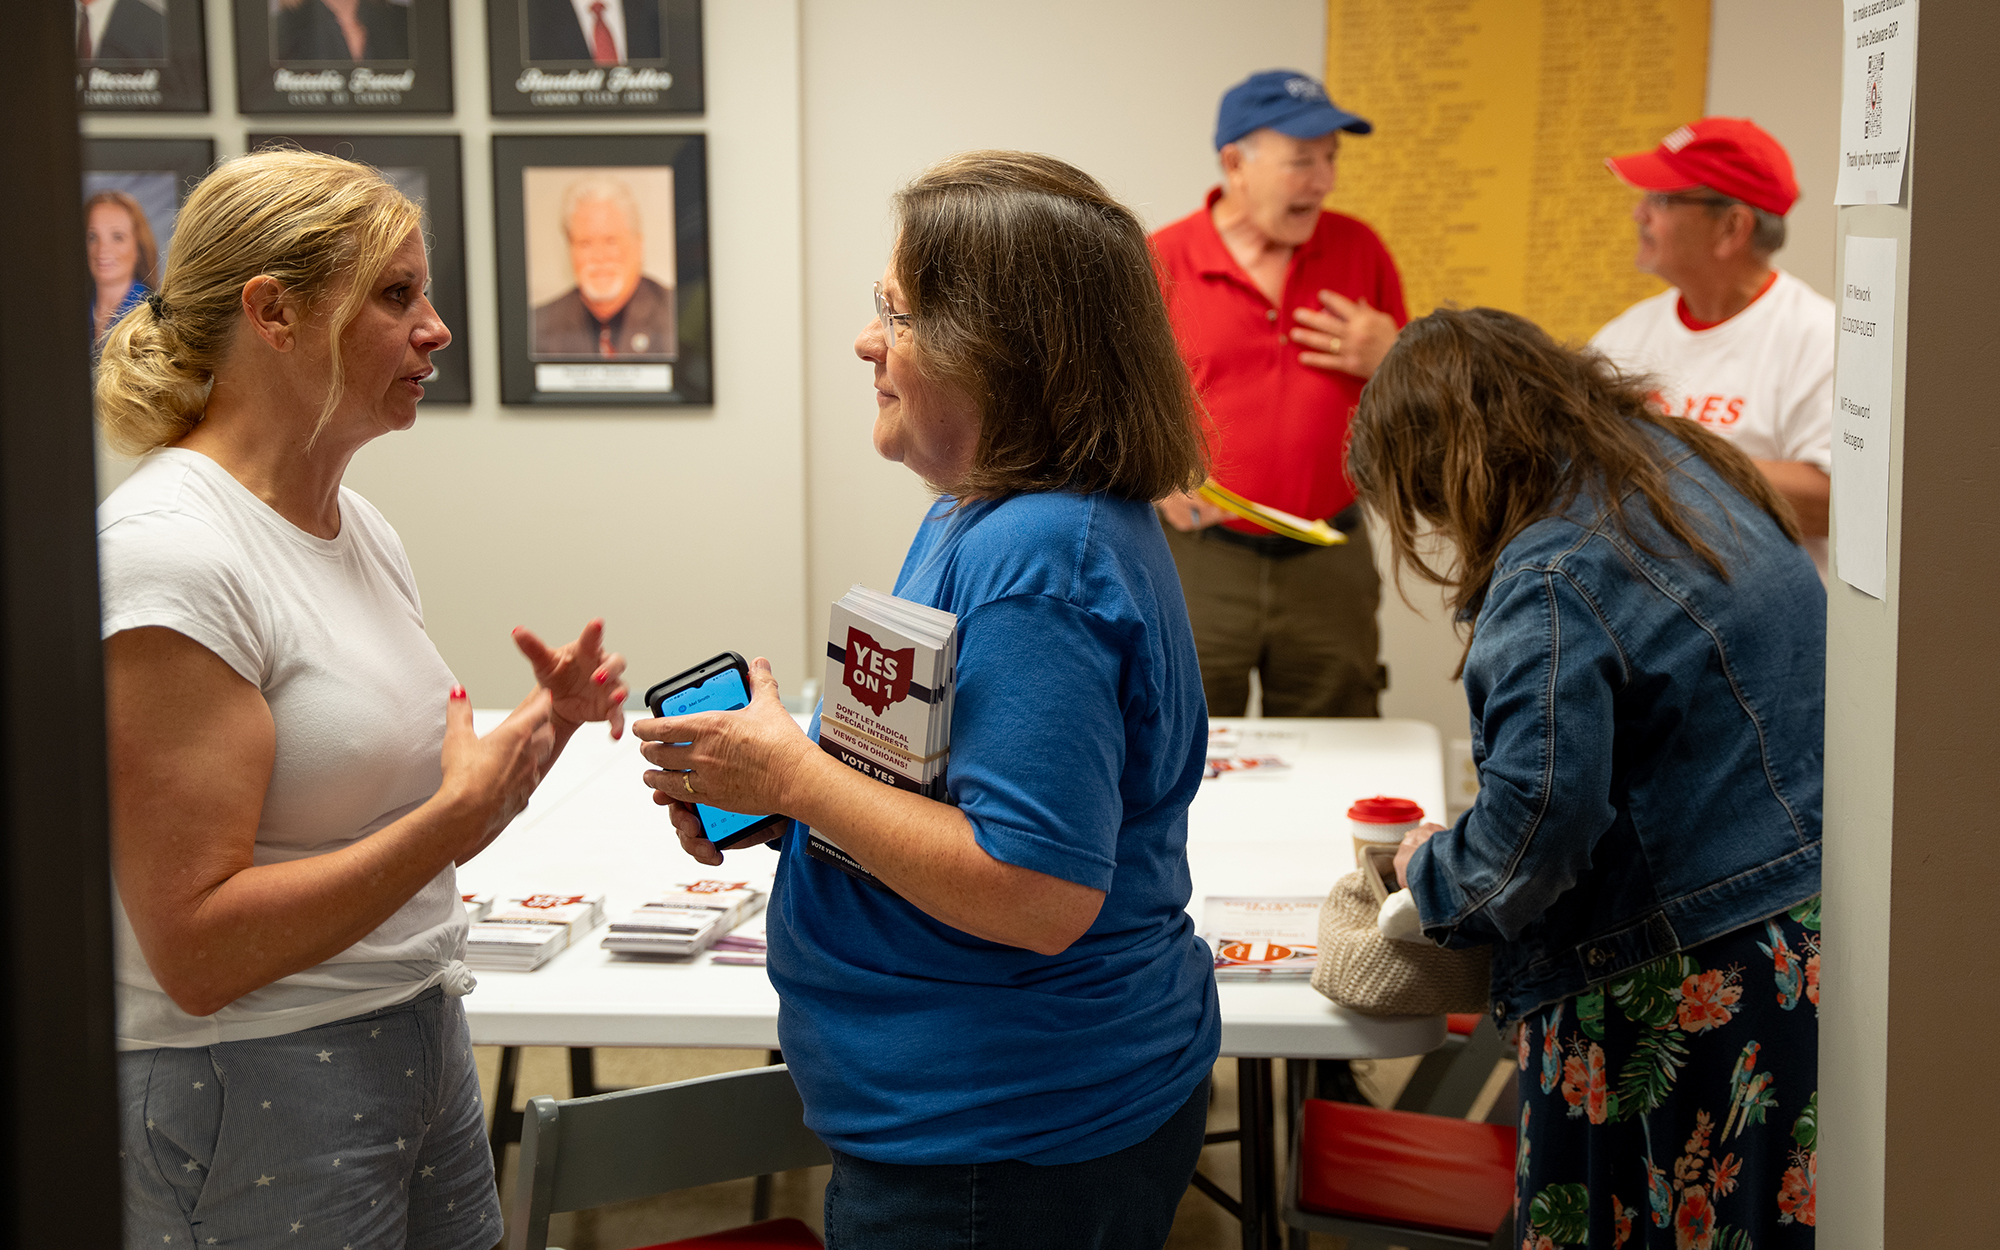 Delaware residents Sue Lorenz, left, and Diane Strait talk during an event at the Delaware County Republican Party headquarters on June 24, 2023. (Photo by Mingson Lau/News21)